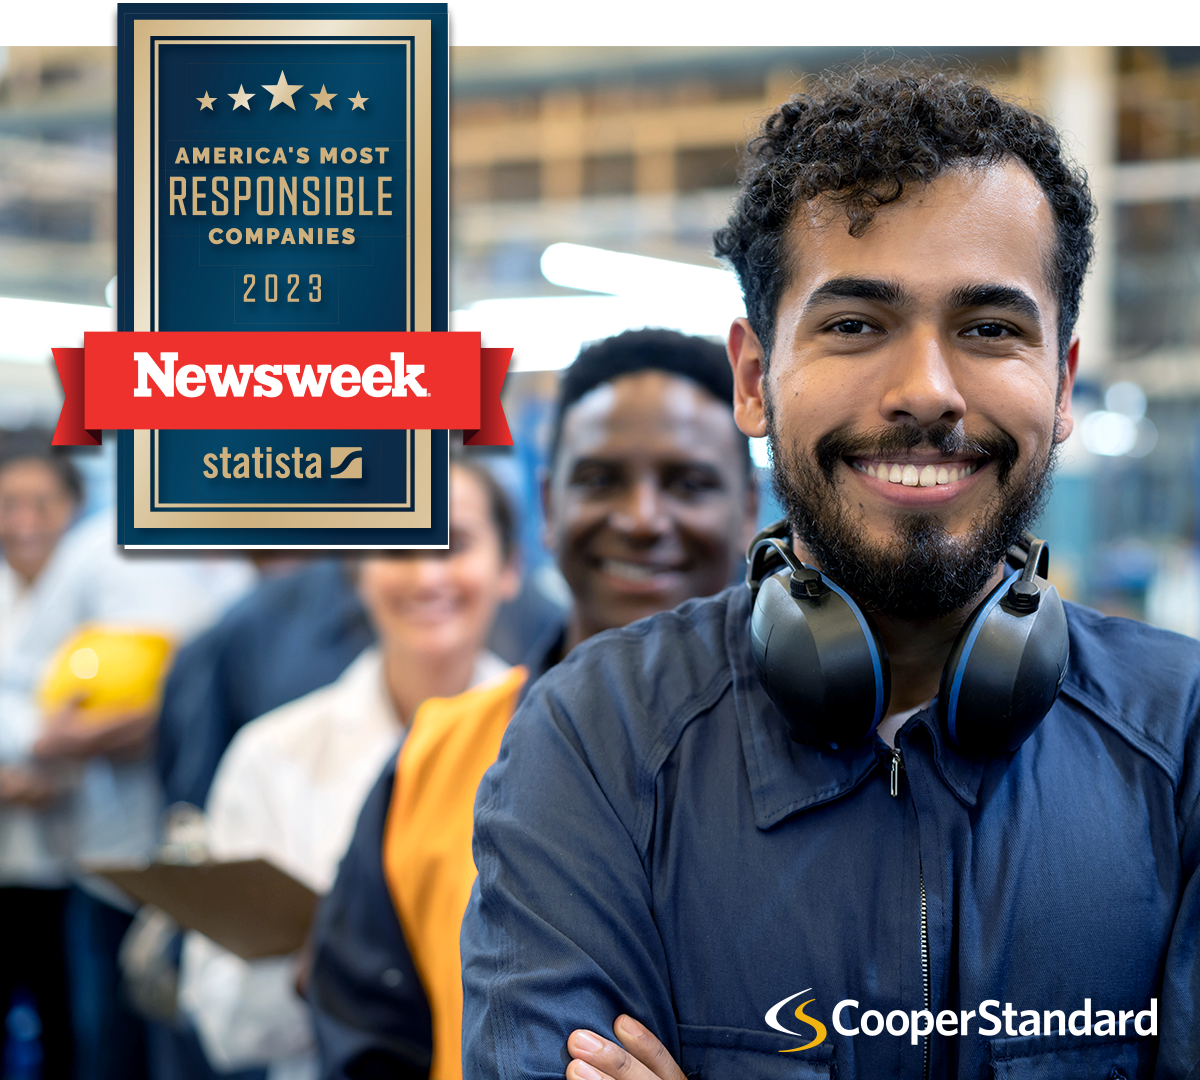 Cooper Standard Named to Newsweek’s America’s Most Responsible Companies 2023 List for Fourth Consecutive Year